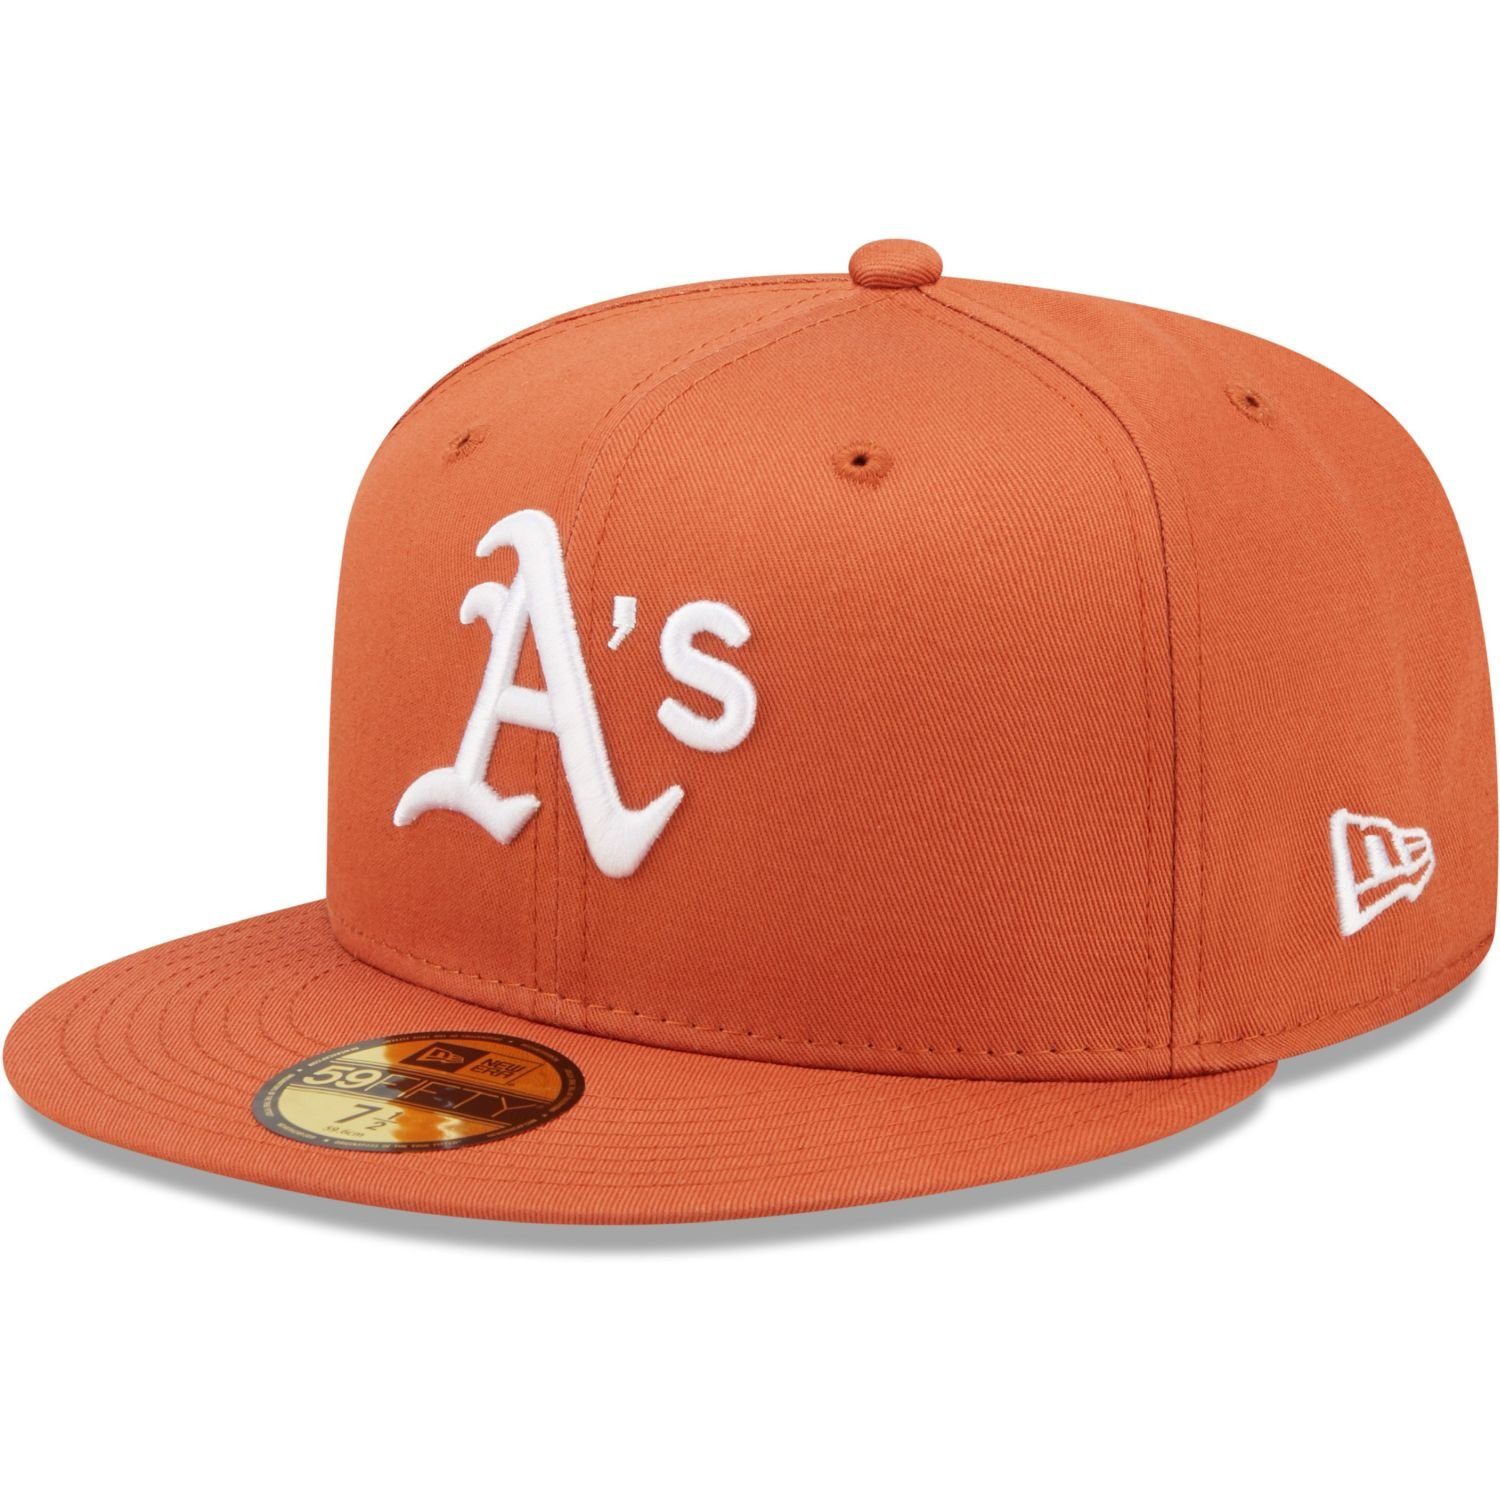 New Era Fitted Cap 59Fifty Oakland Athletics